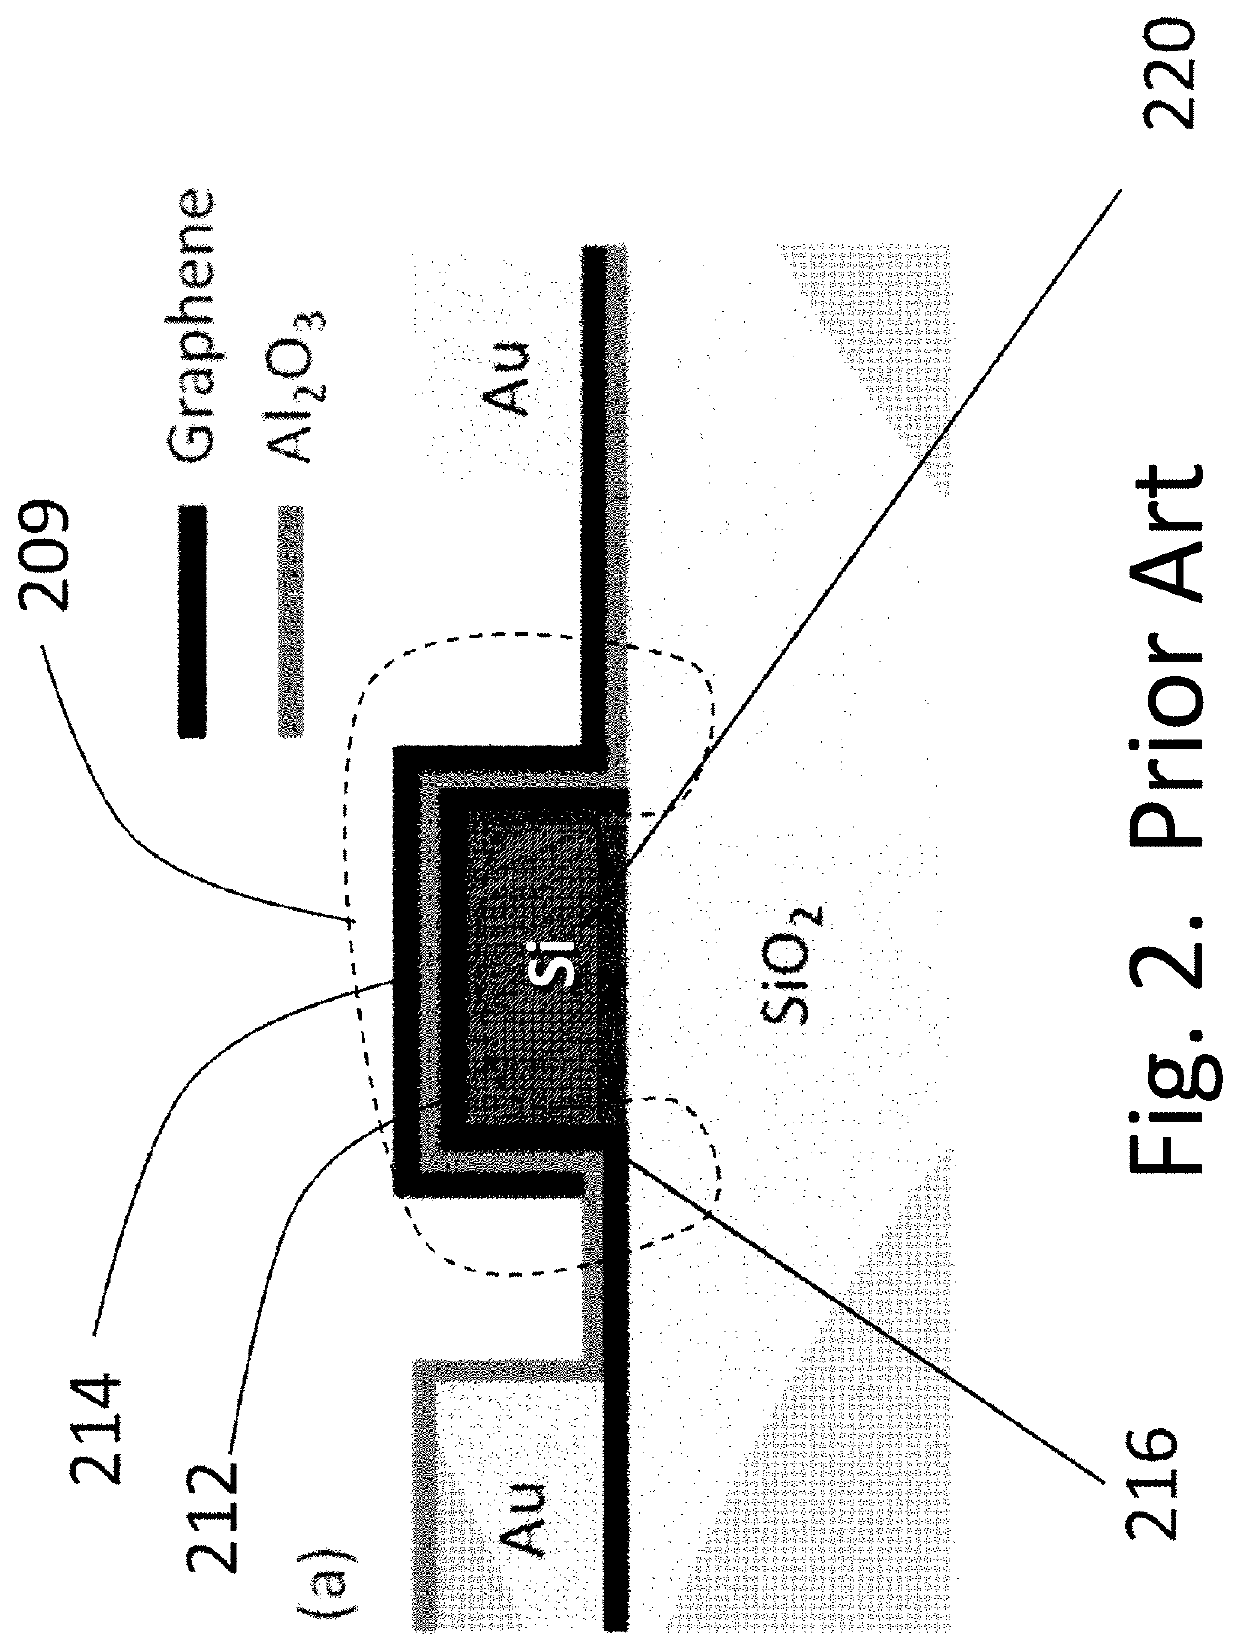 System and method for cryogenic optoelectronic data link